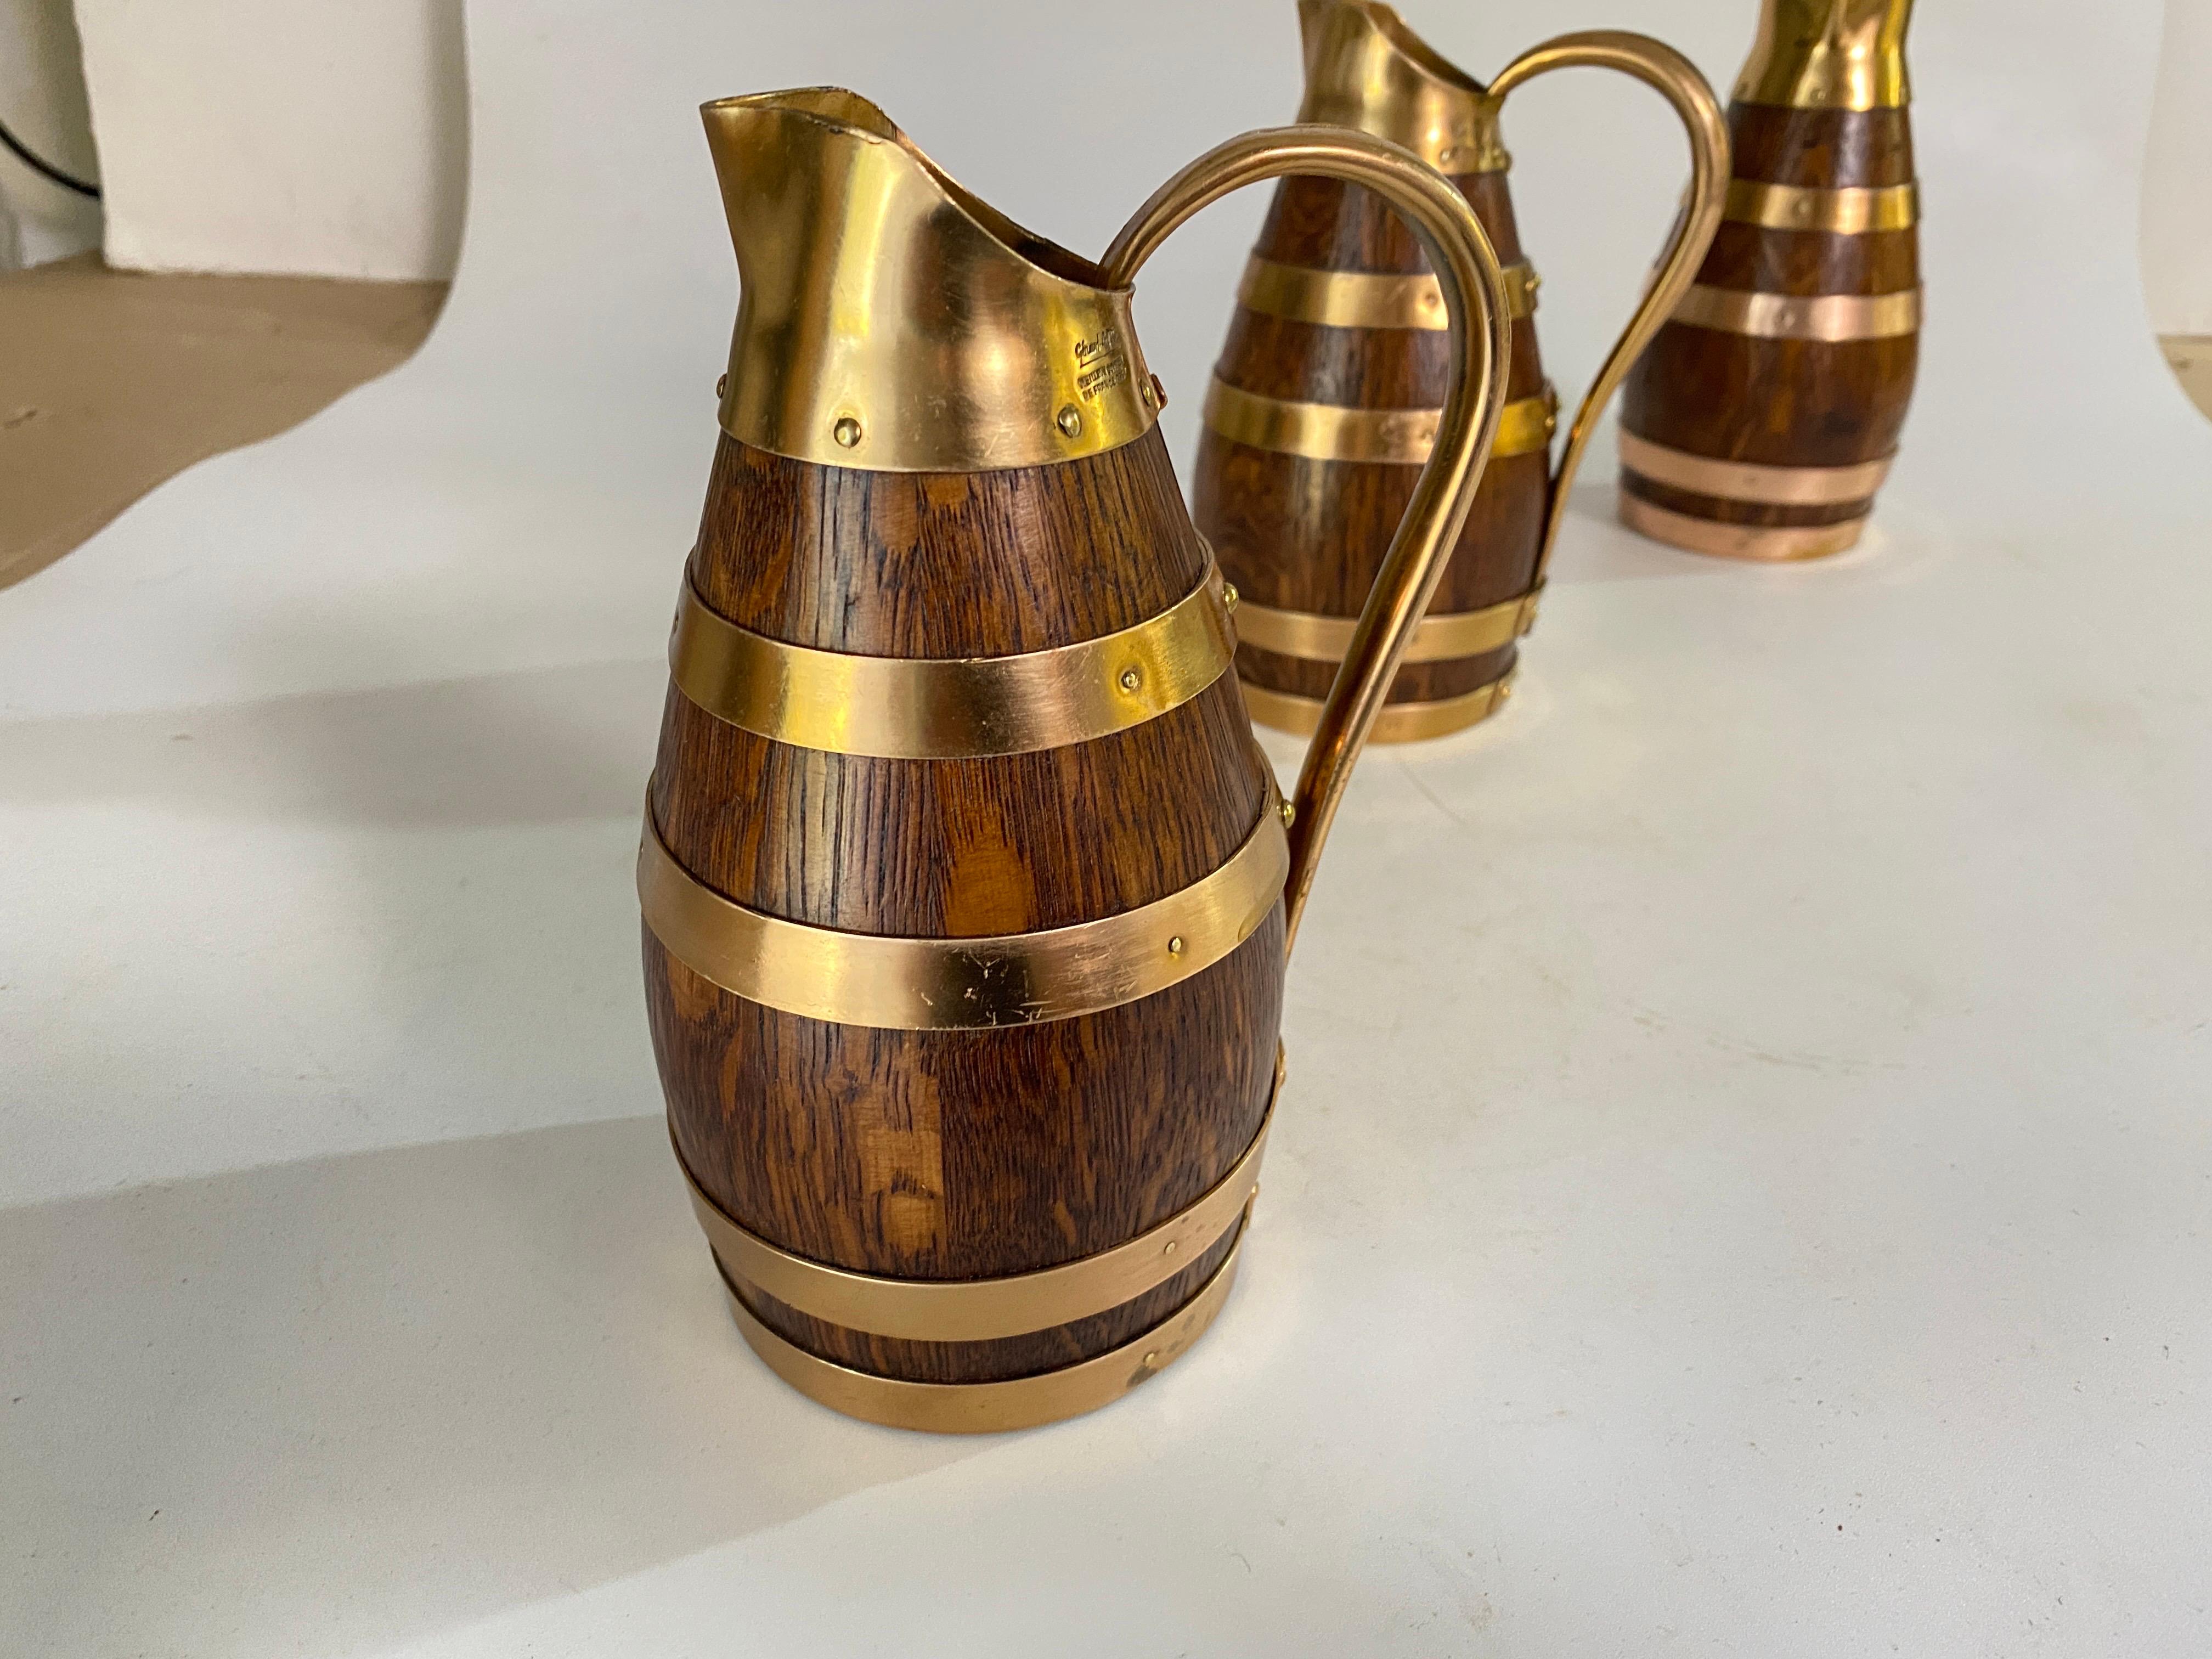  Superb 1933, Set of three Brass banded, oak barrels. This beautiful wine or cider jugs were created by Gérard Lafitte, selected as Meilleur Ouvrier de France (one of the best workers in France) an annual trade award started in 1924 given to master